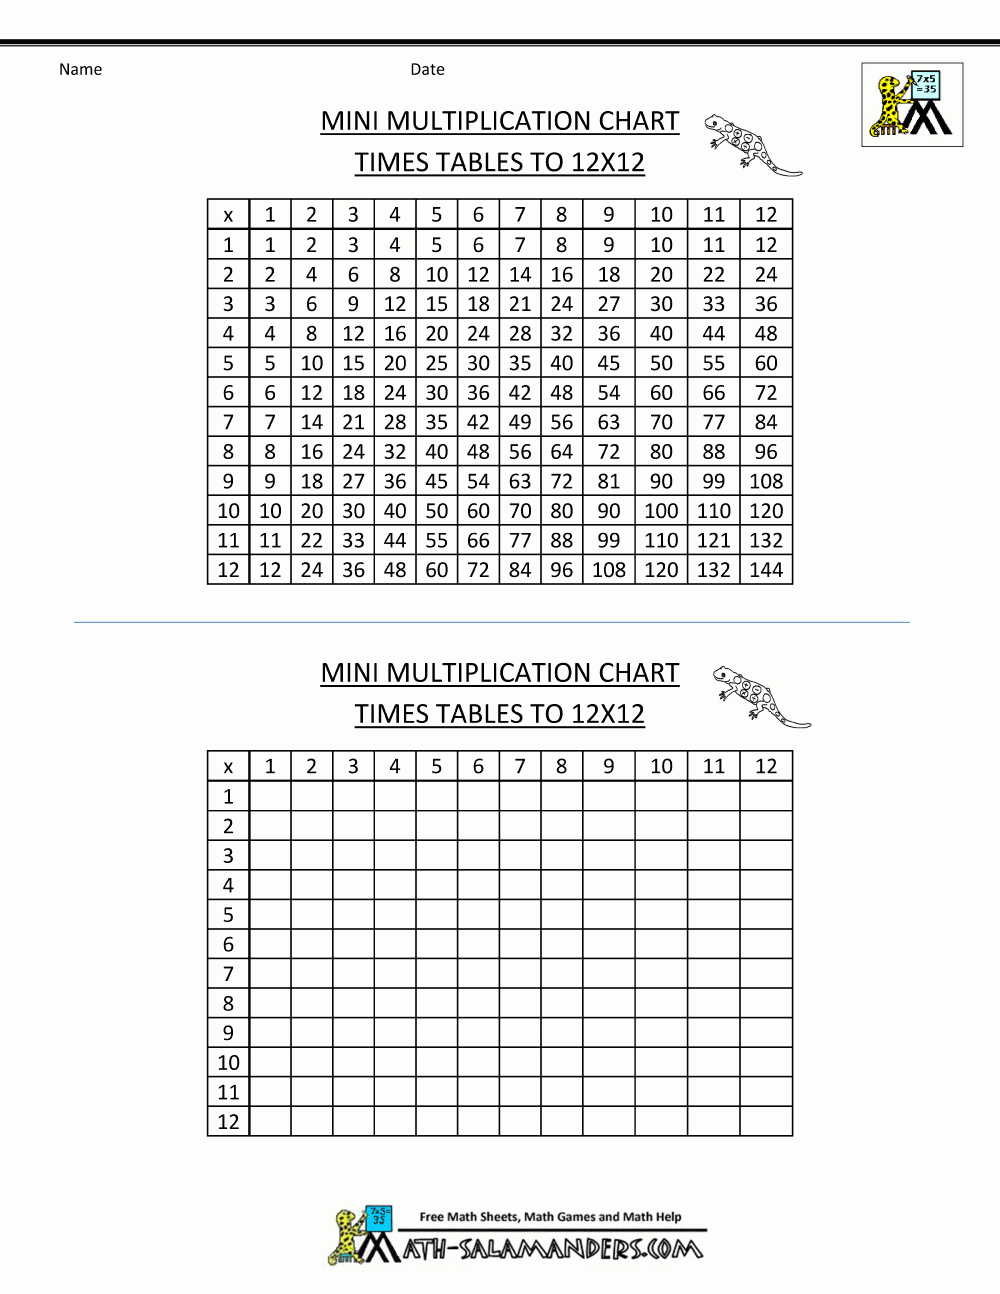 Multiplication Times Table Chart To 12X12 Mini Blank 1 | Maths - Free Printable Blank Multiplication Table 1 12